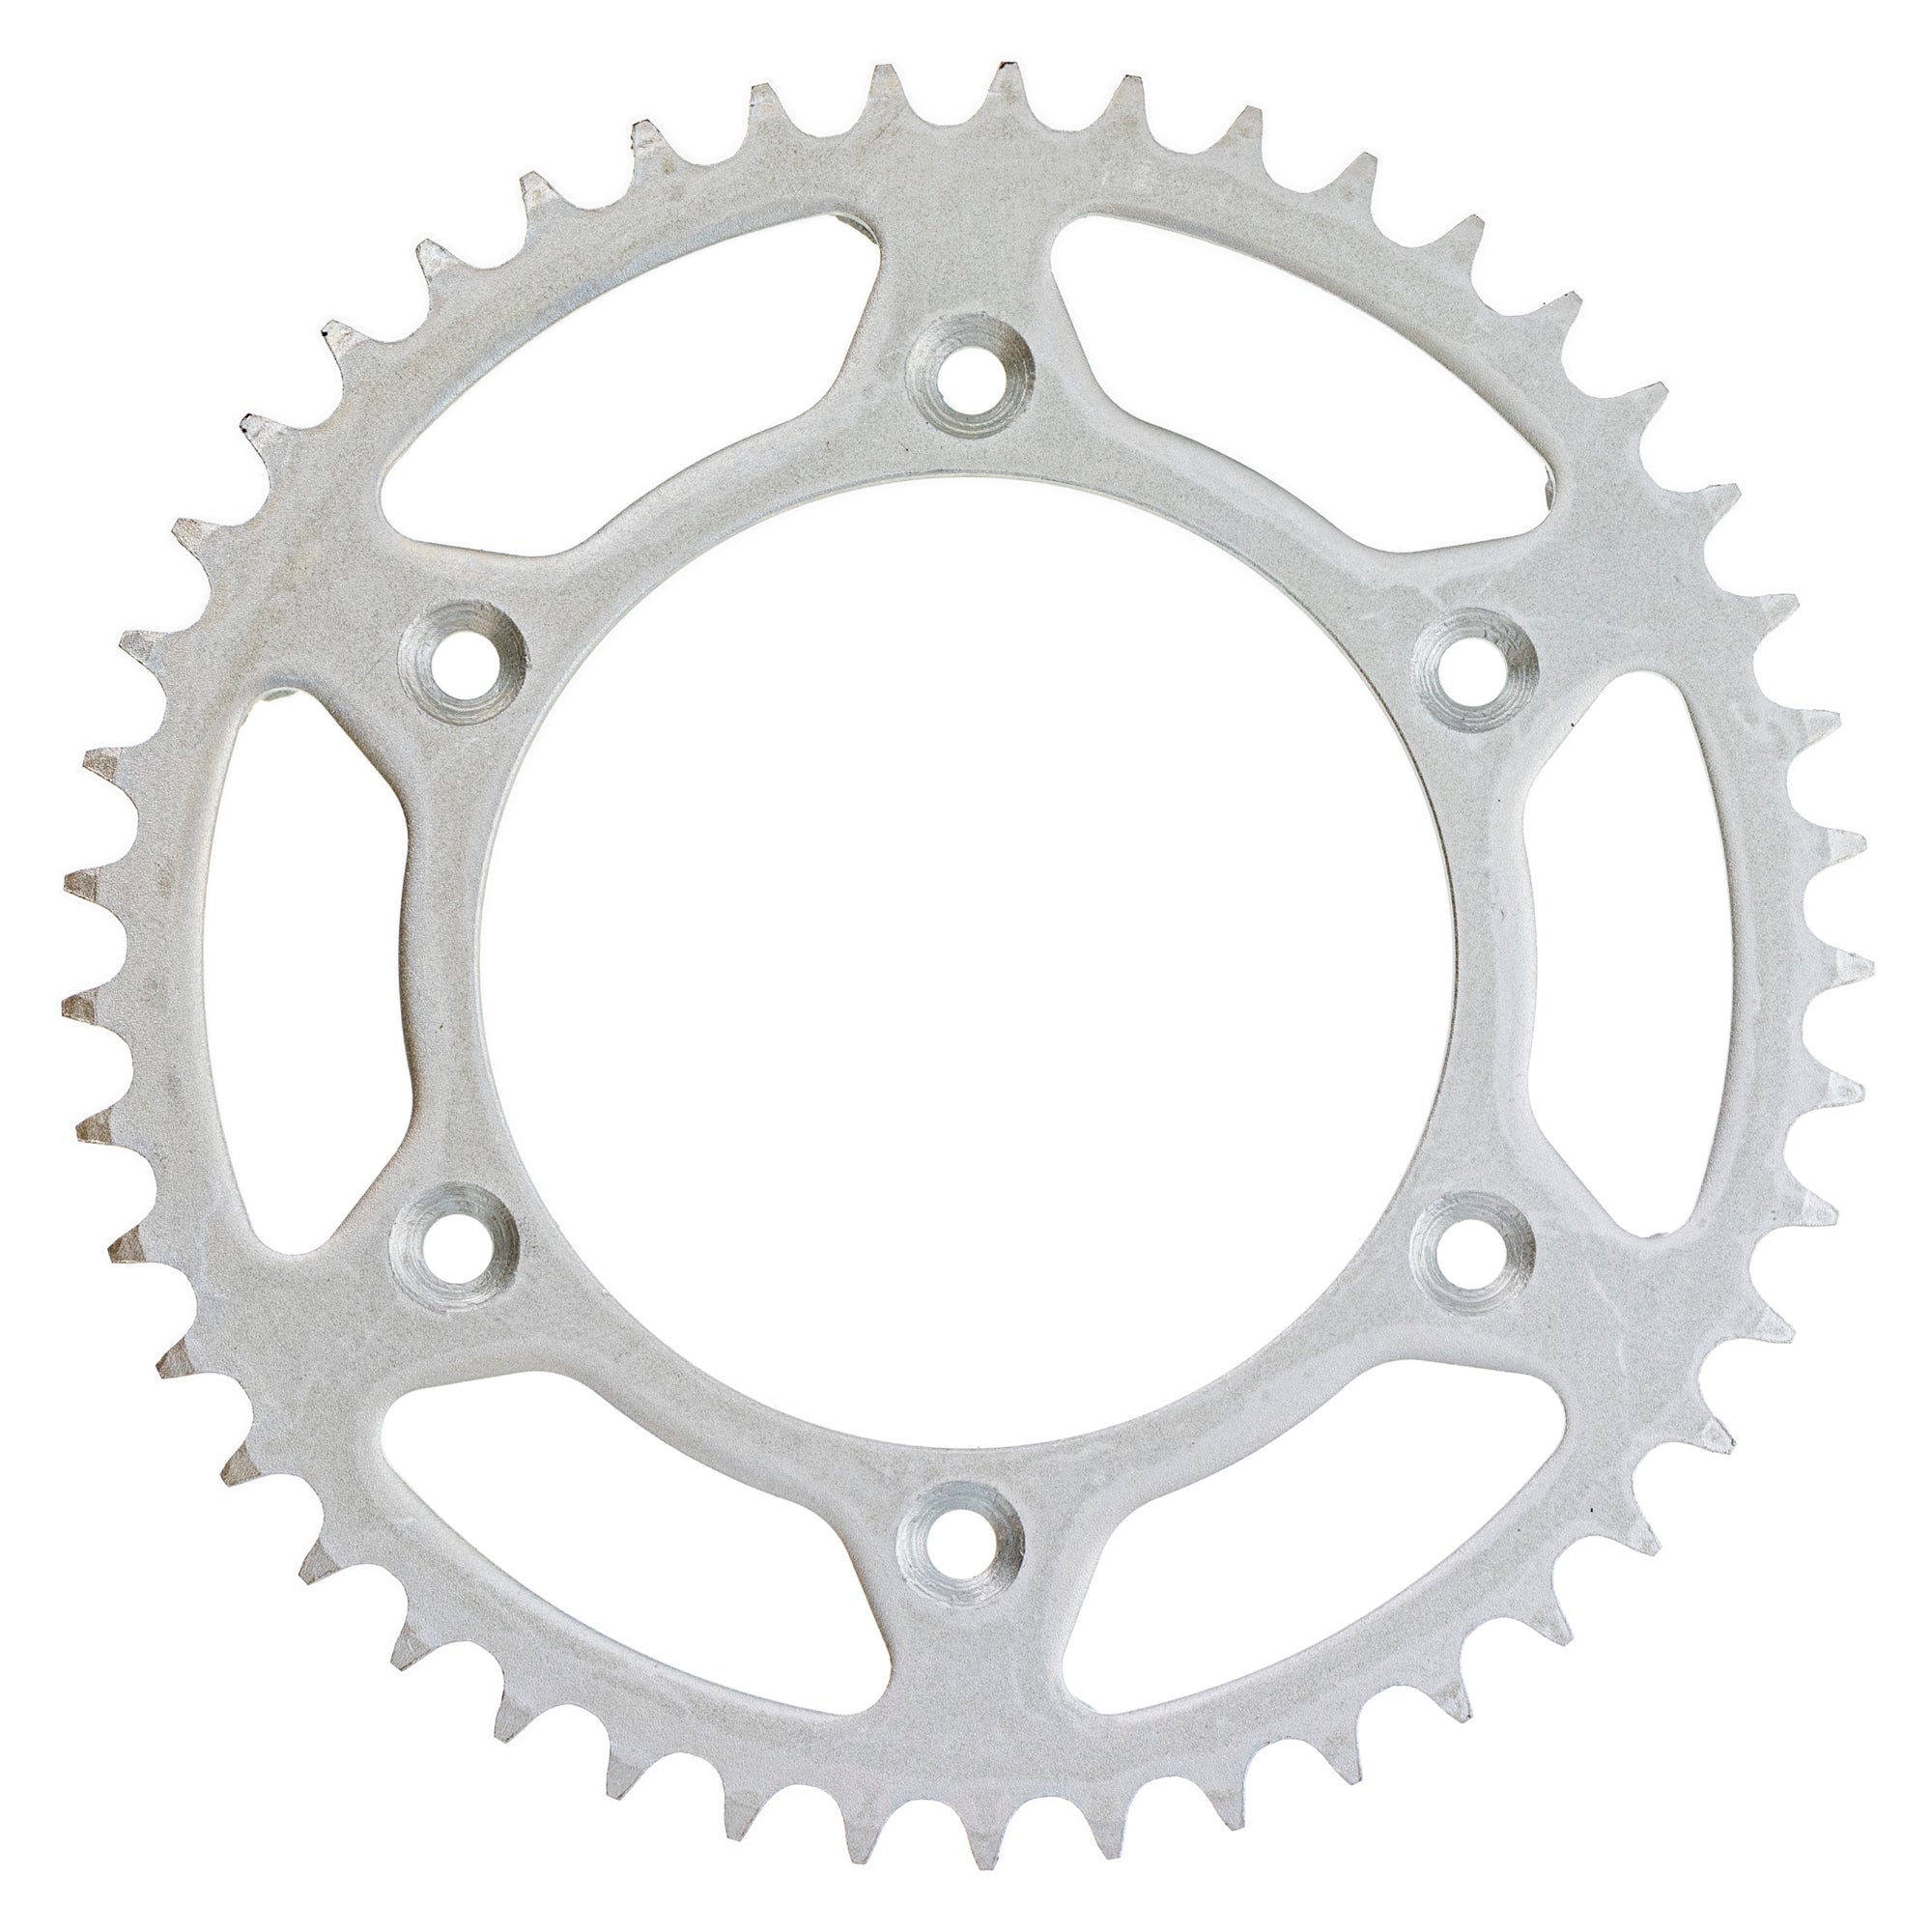 520 Pitch Front 14T Rear 45T Drive Sprocket Kit for KTM 250 450 200